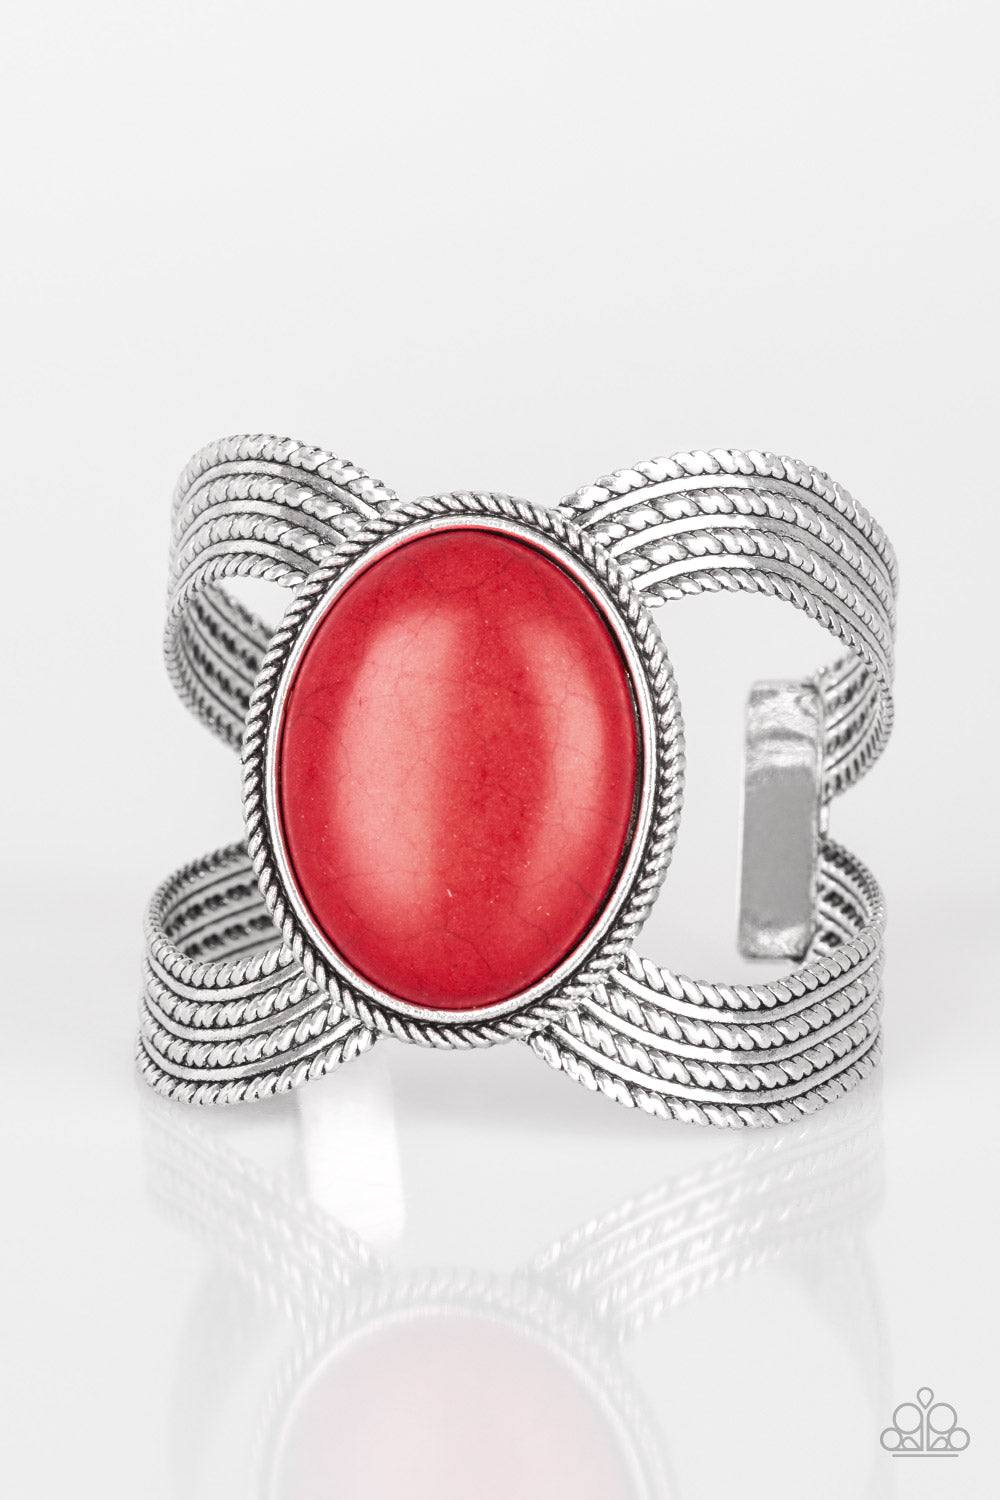 Coyote Couture - Red Stone Cuff Bracelet - Princess Glam Shop